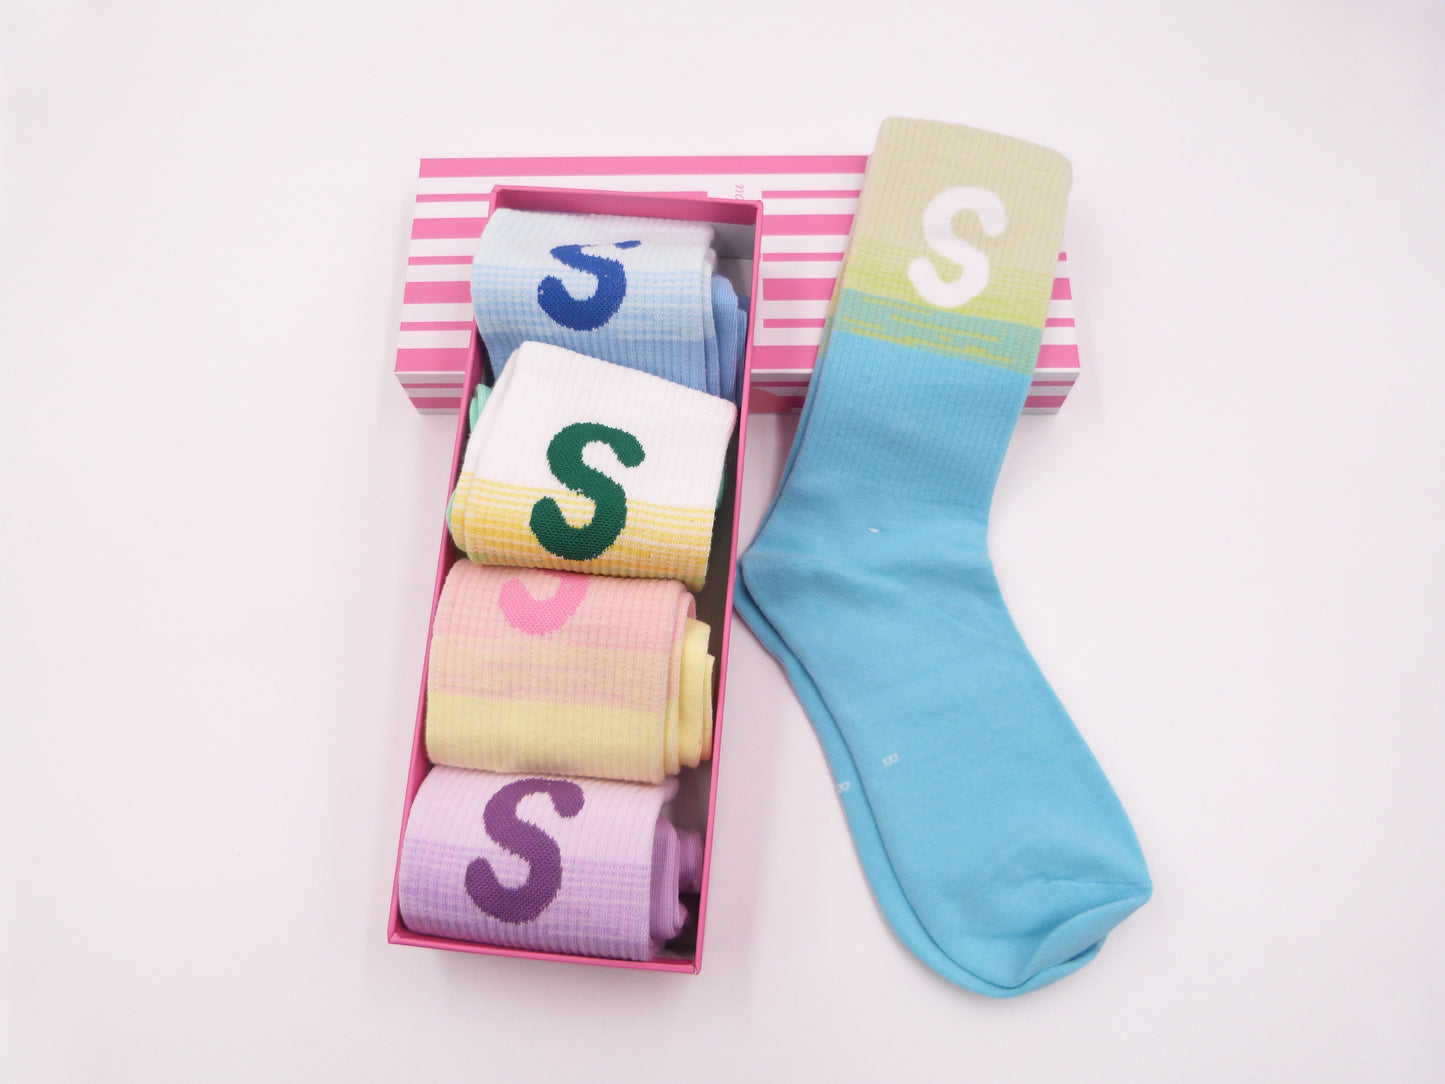 5 Pairs Of Socks With Gift Box